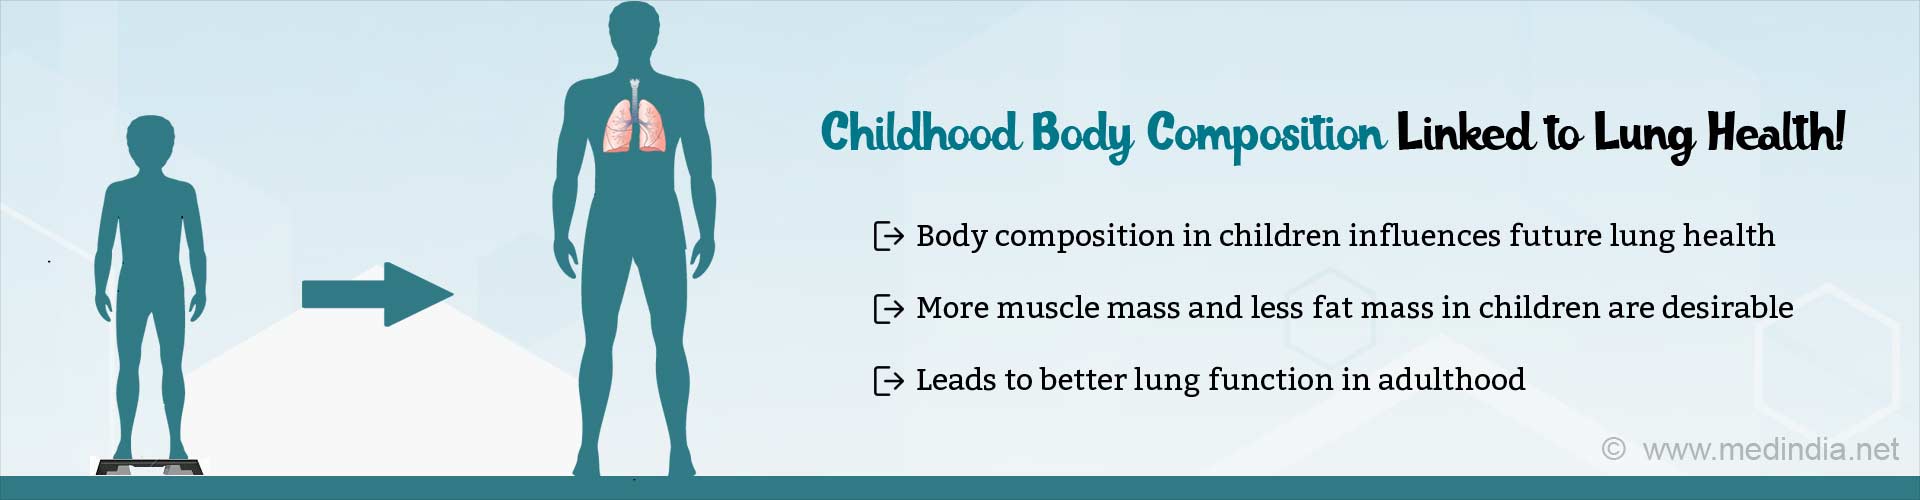 Childhood body composition linked to lung health. Body composition in children influences future lung health. More muscle mass and less fat mass in children is desirable. Leads to better lung function in adulthood.